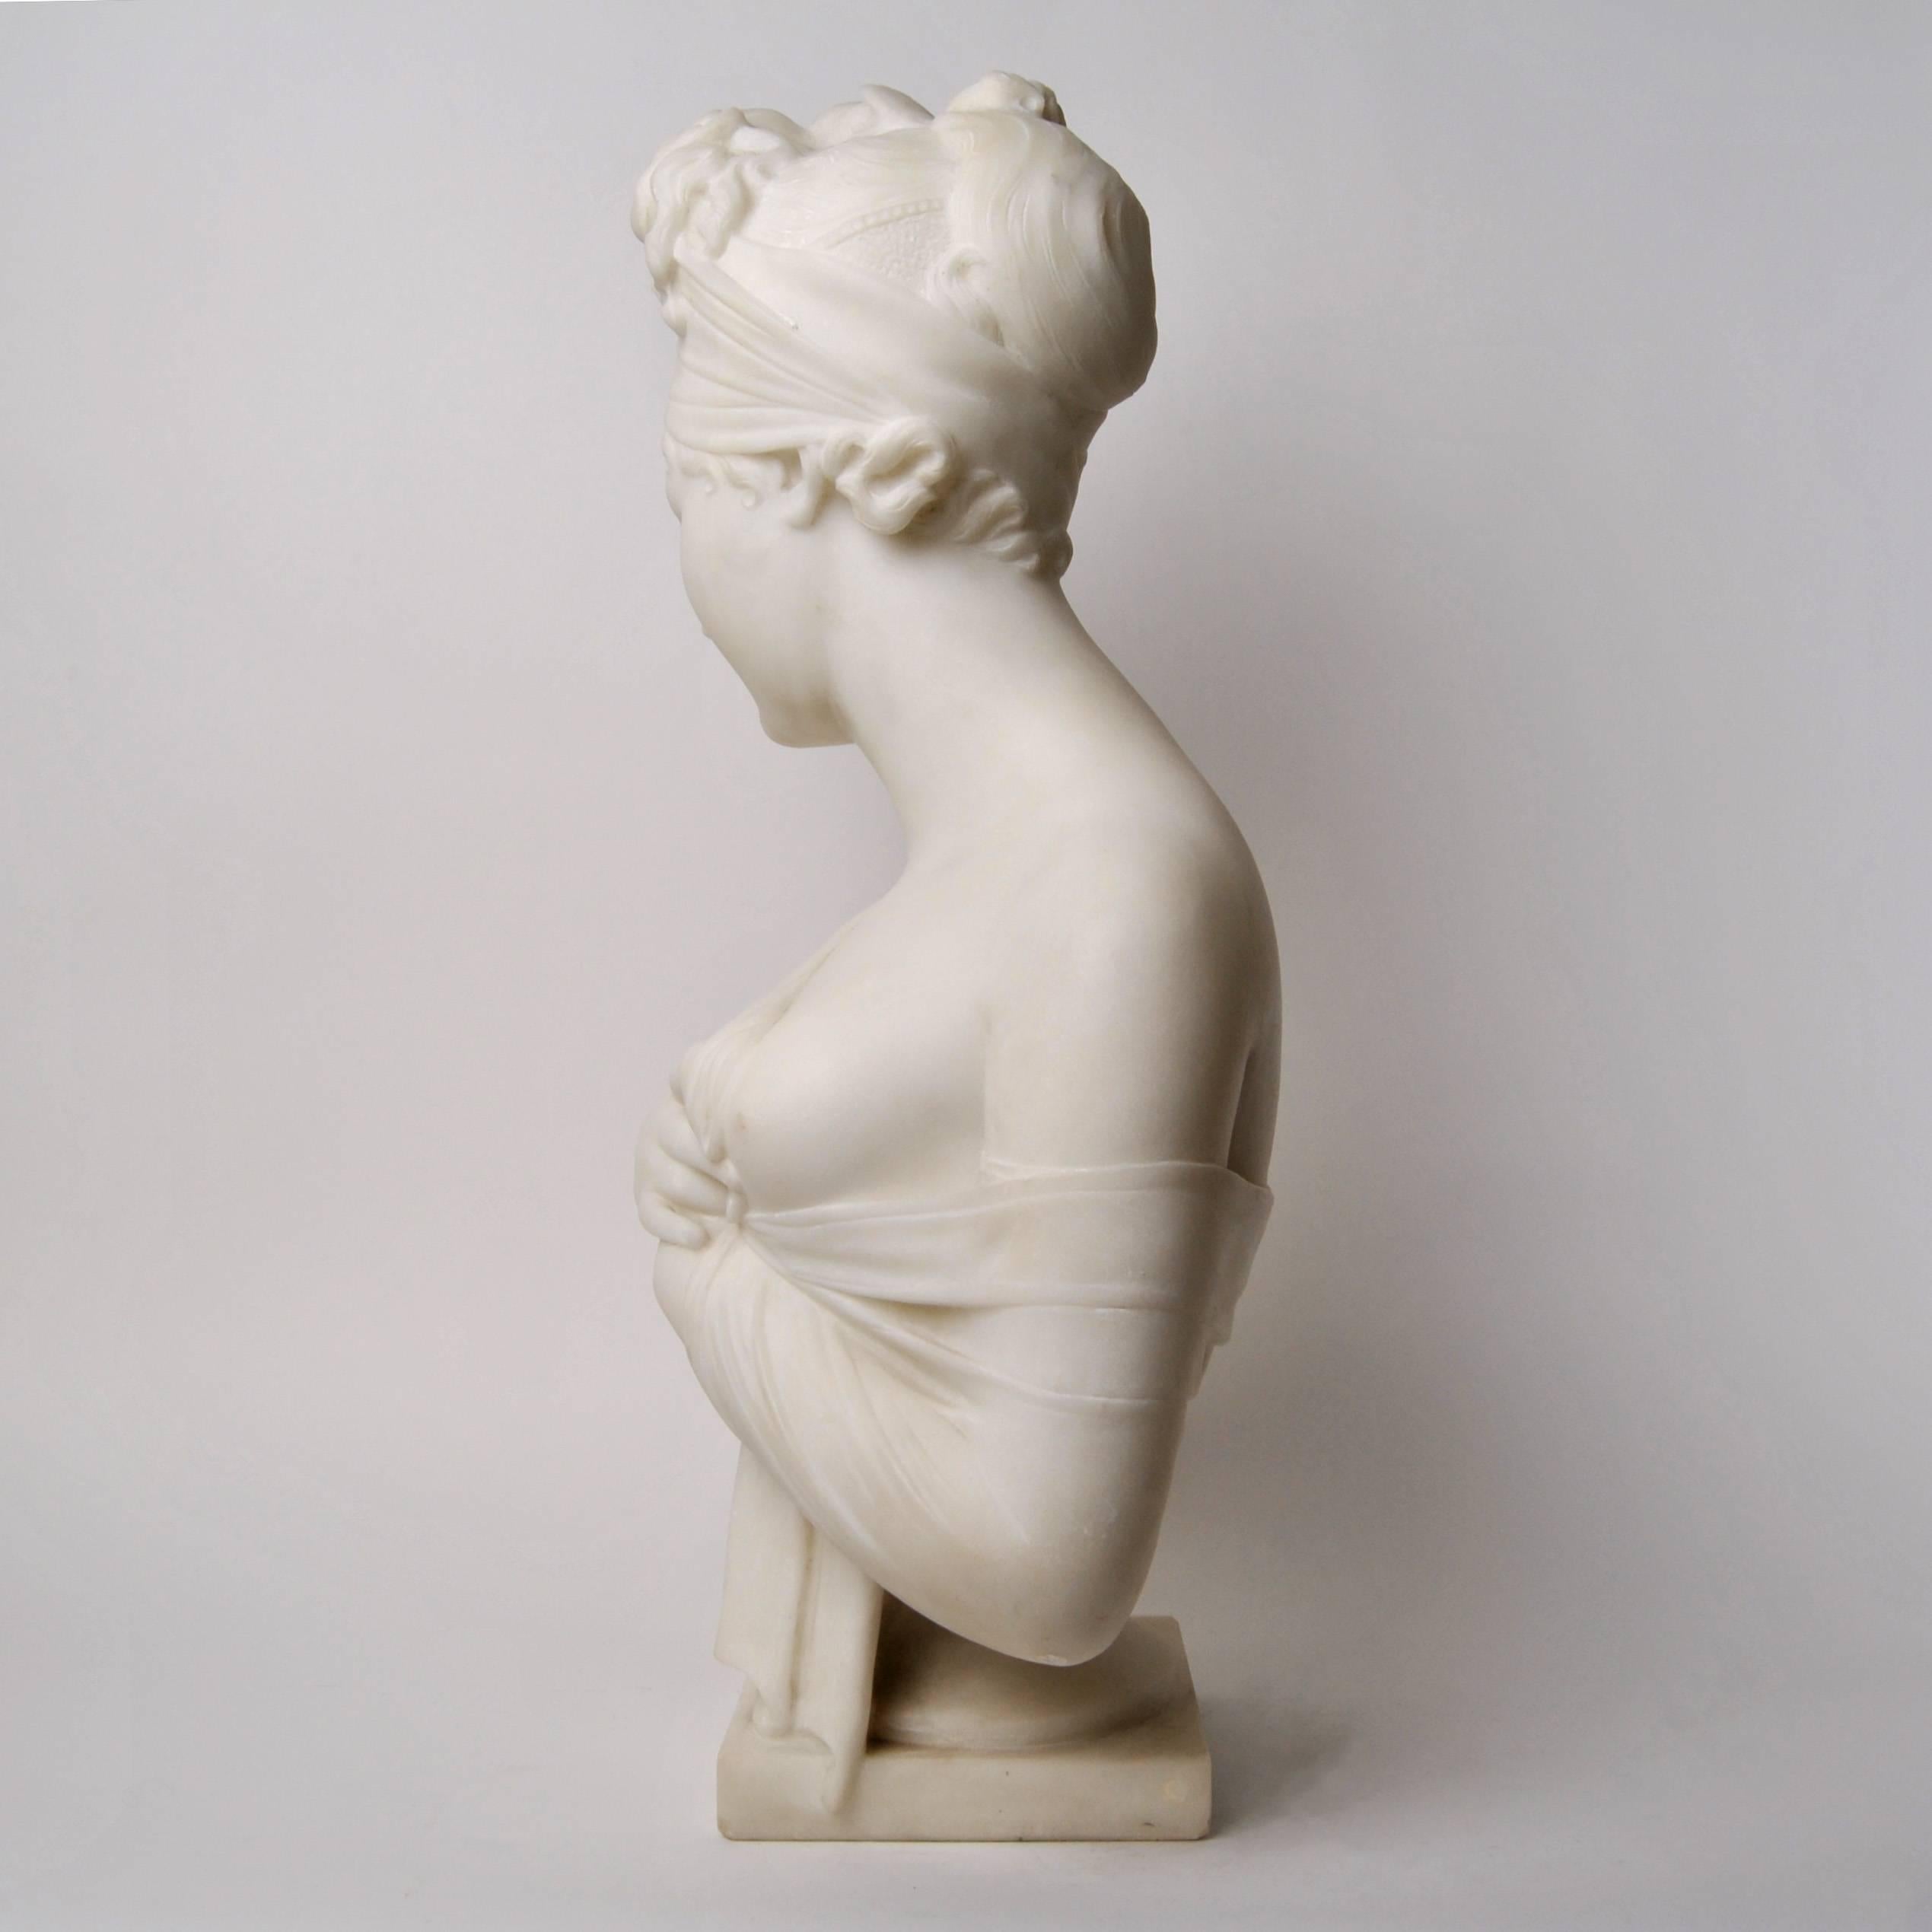 A beautiful bust depicting Juliette Récamier (1777-1849) who was a famous French society leader and intellectual. 

The bust is signed by the Italian artist Guglielmo Pugi (1850-1915) who worked as a sculptor in Florence 1870-1915. Made in